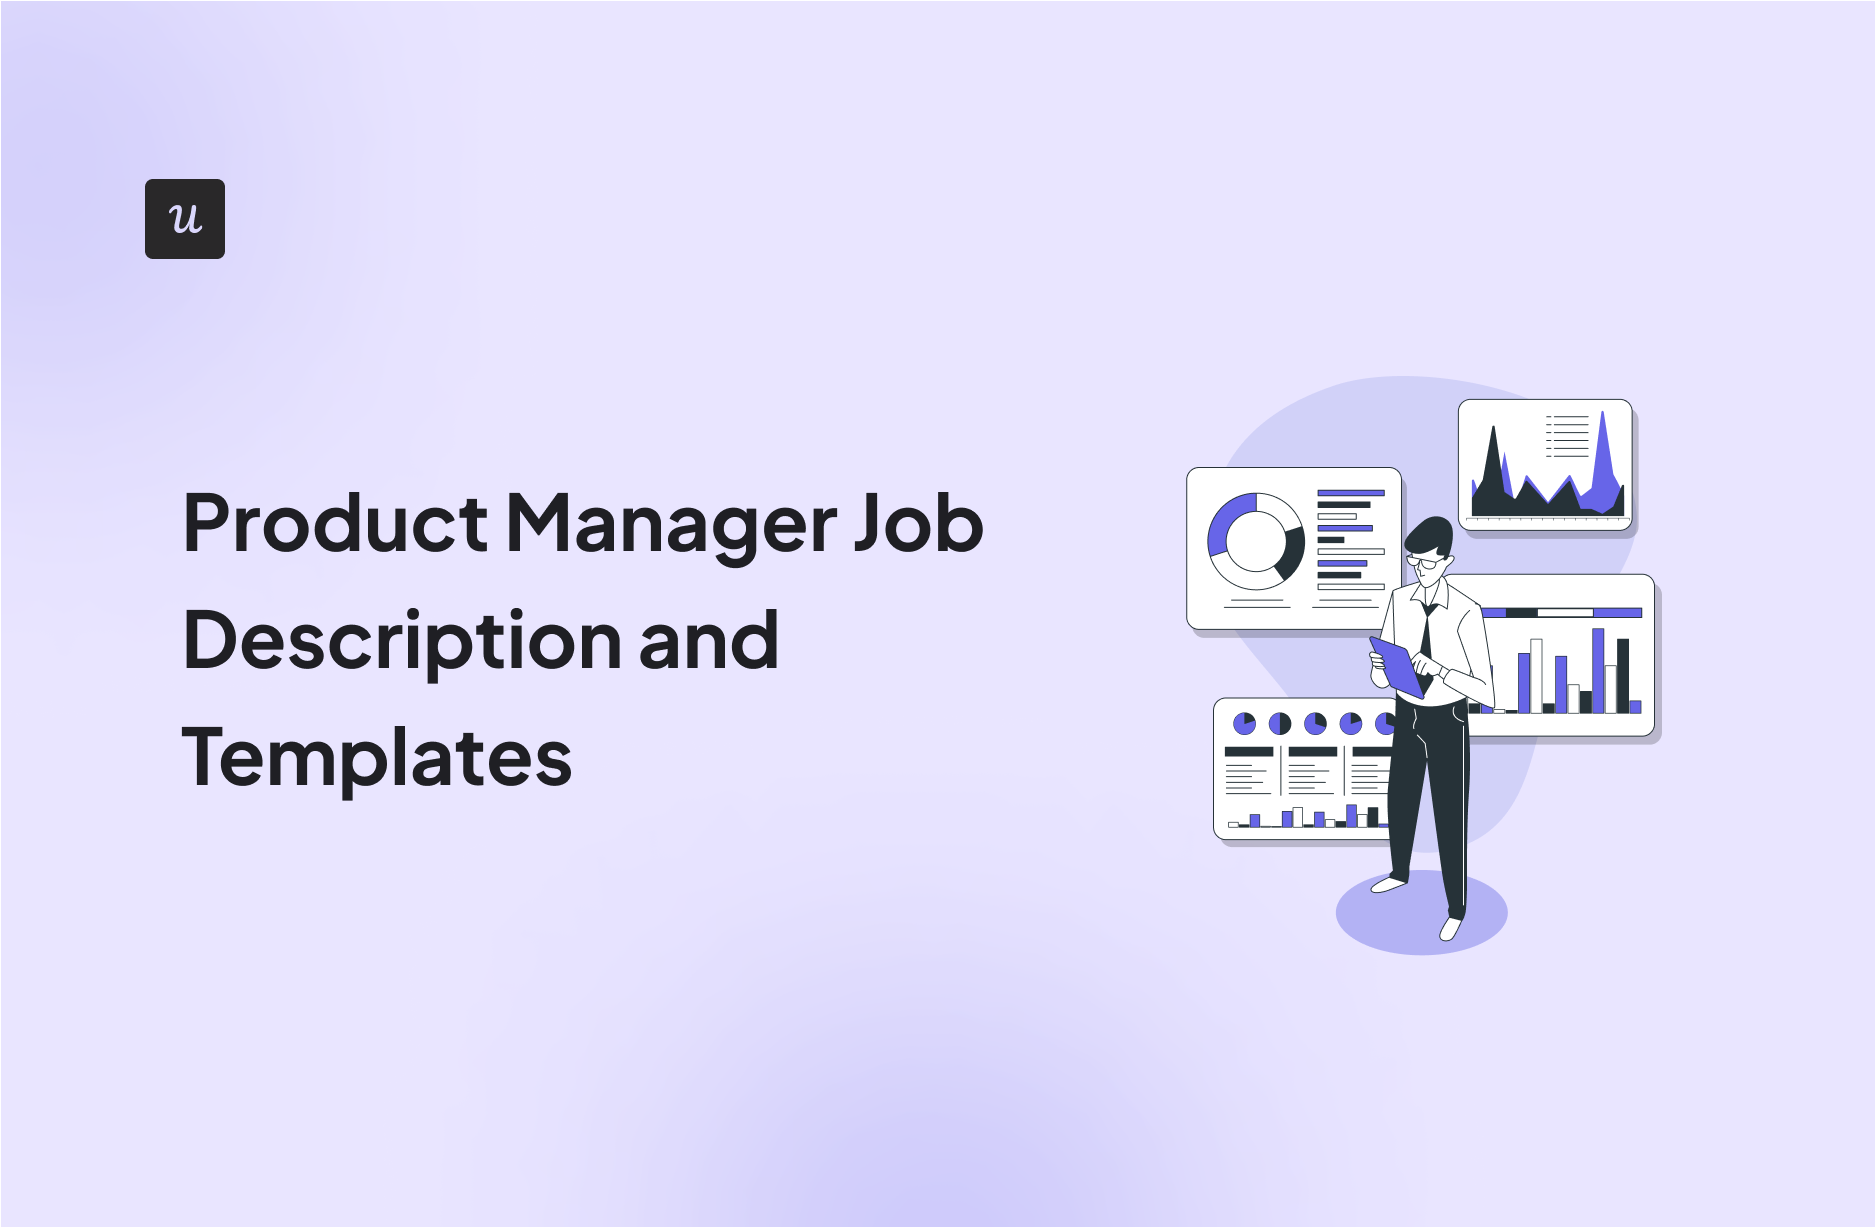 Product Manager Job Description and Templates